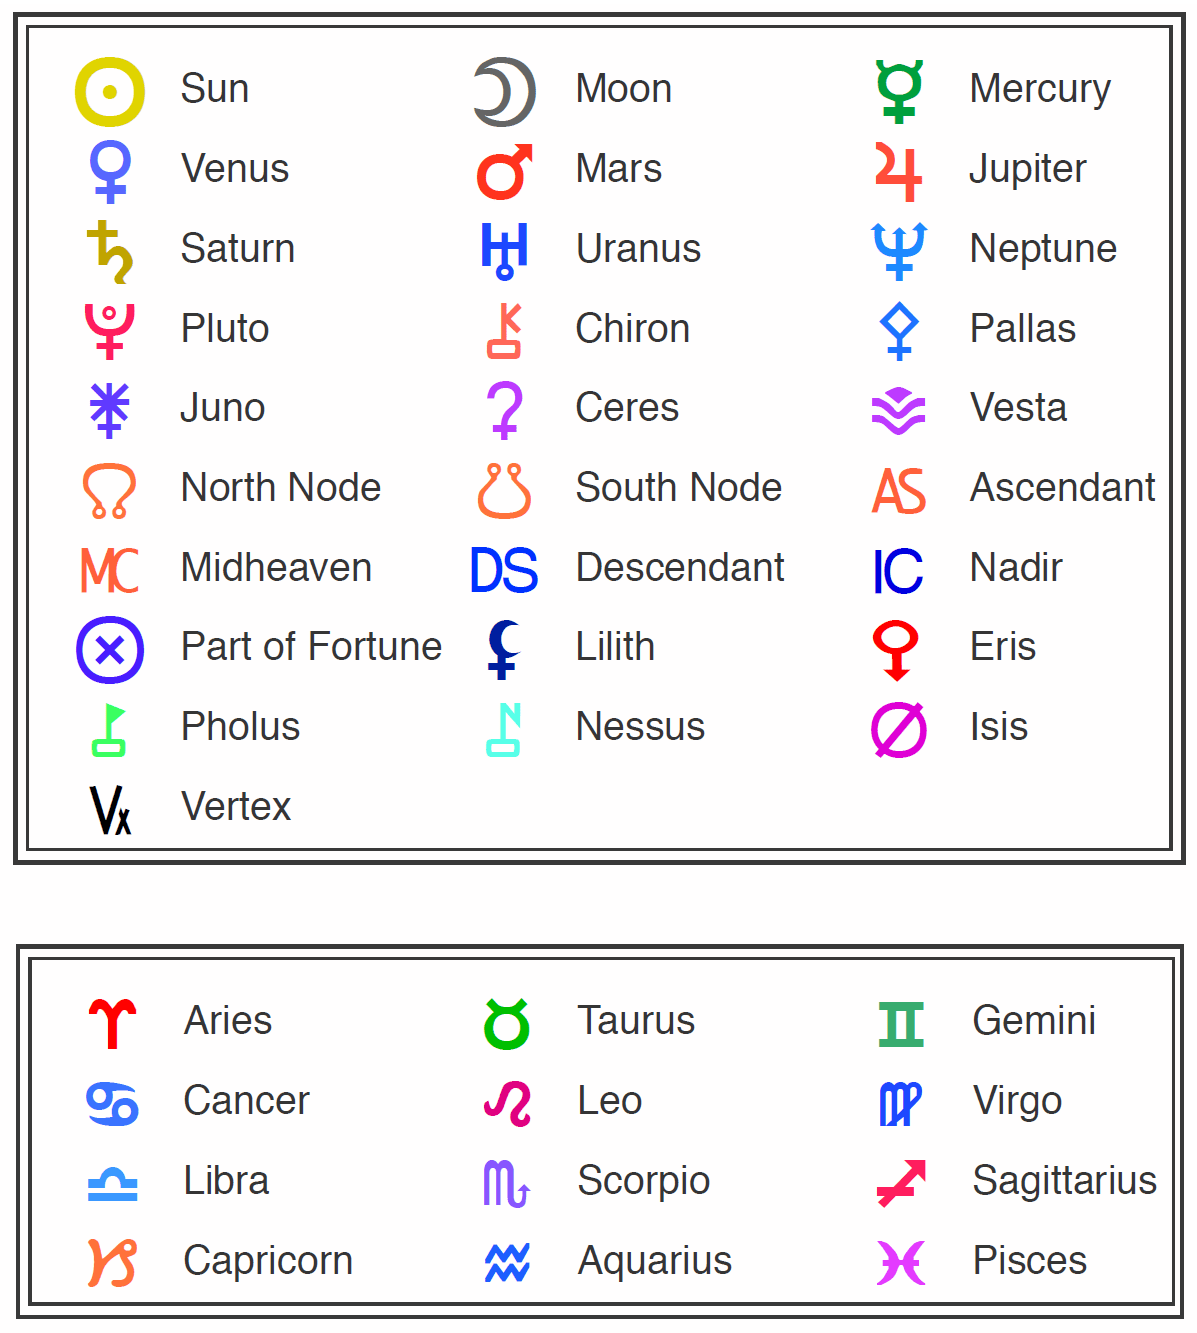 Legend lists symbols of the planets, luminaries, and zodiac signs